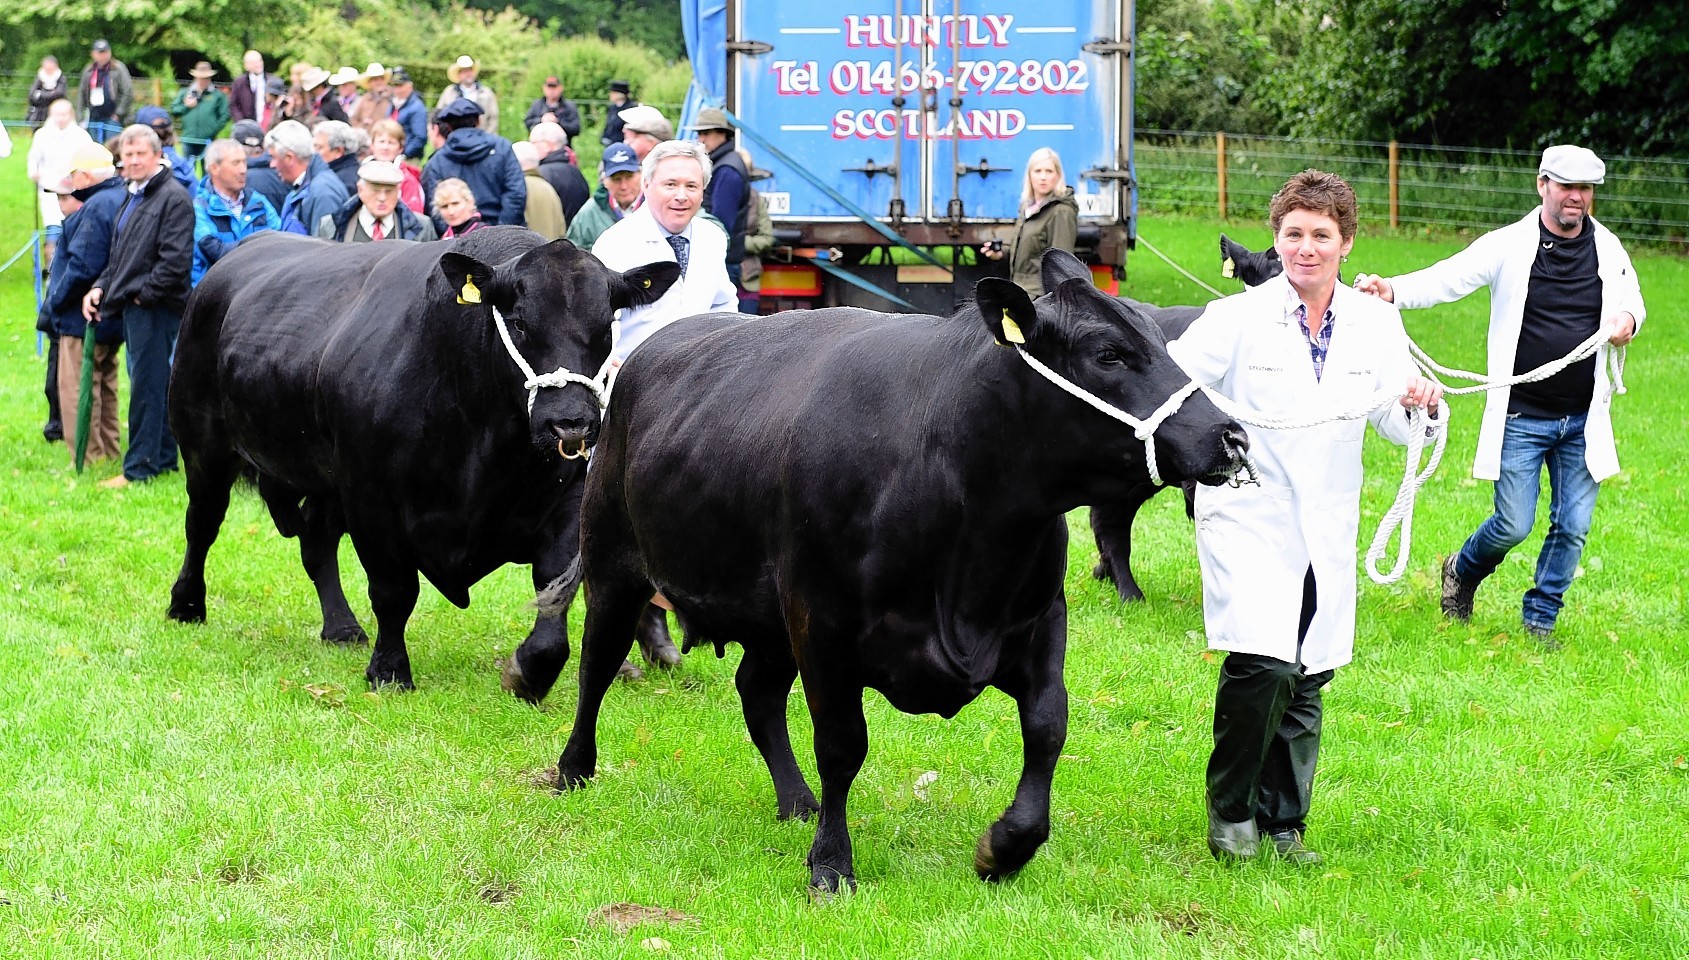 World Angus Forum celebrates one of the AberdeenAngus breed founders